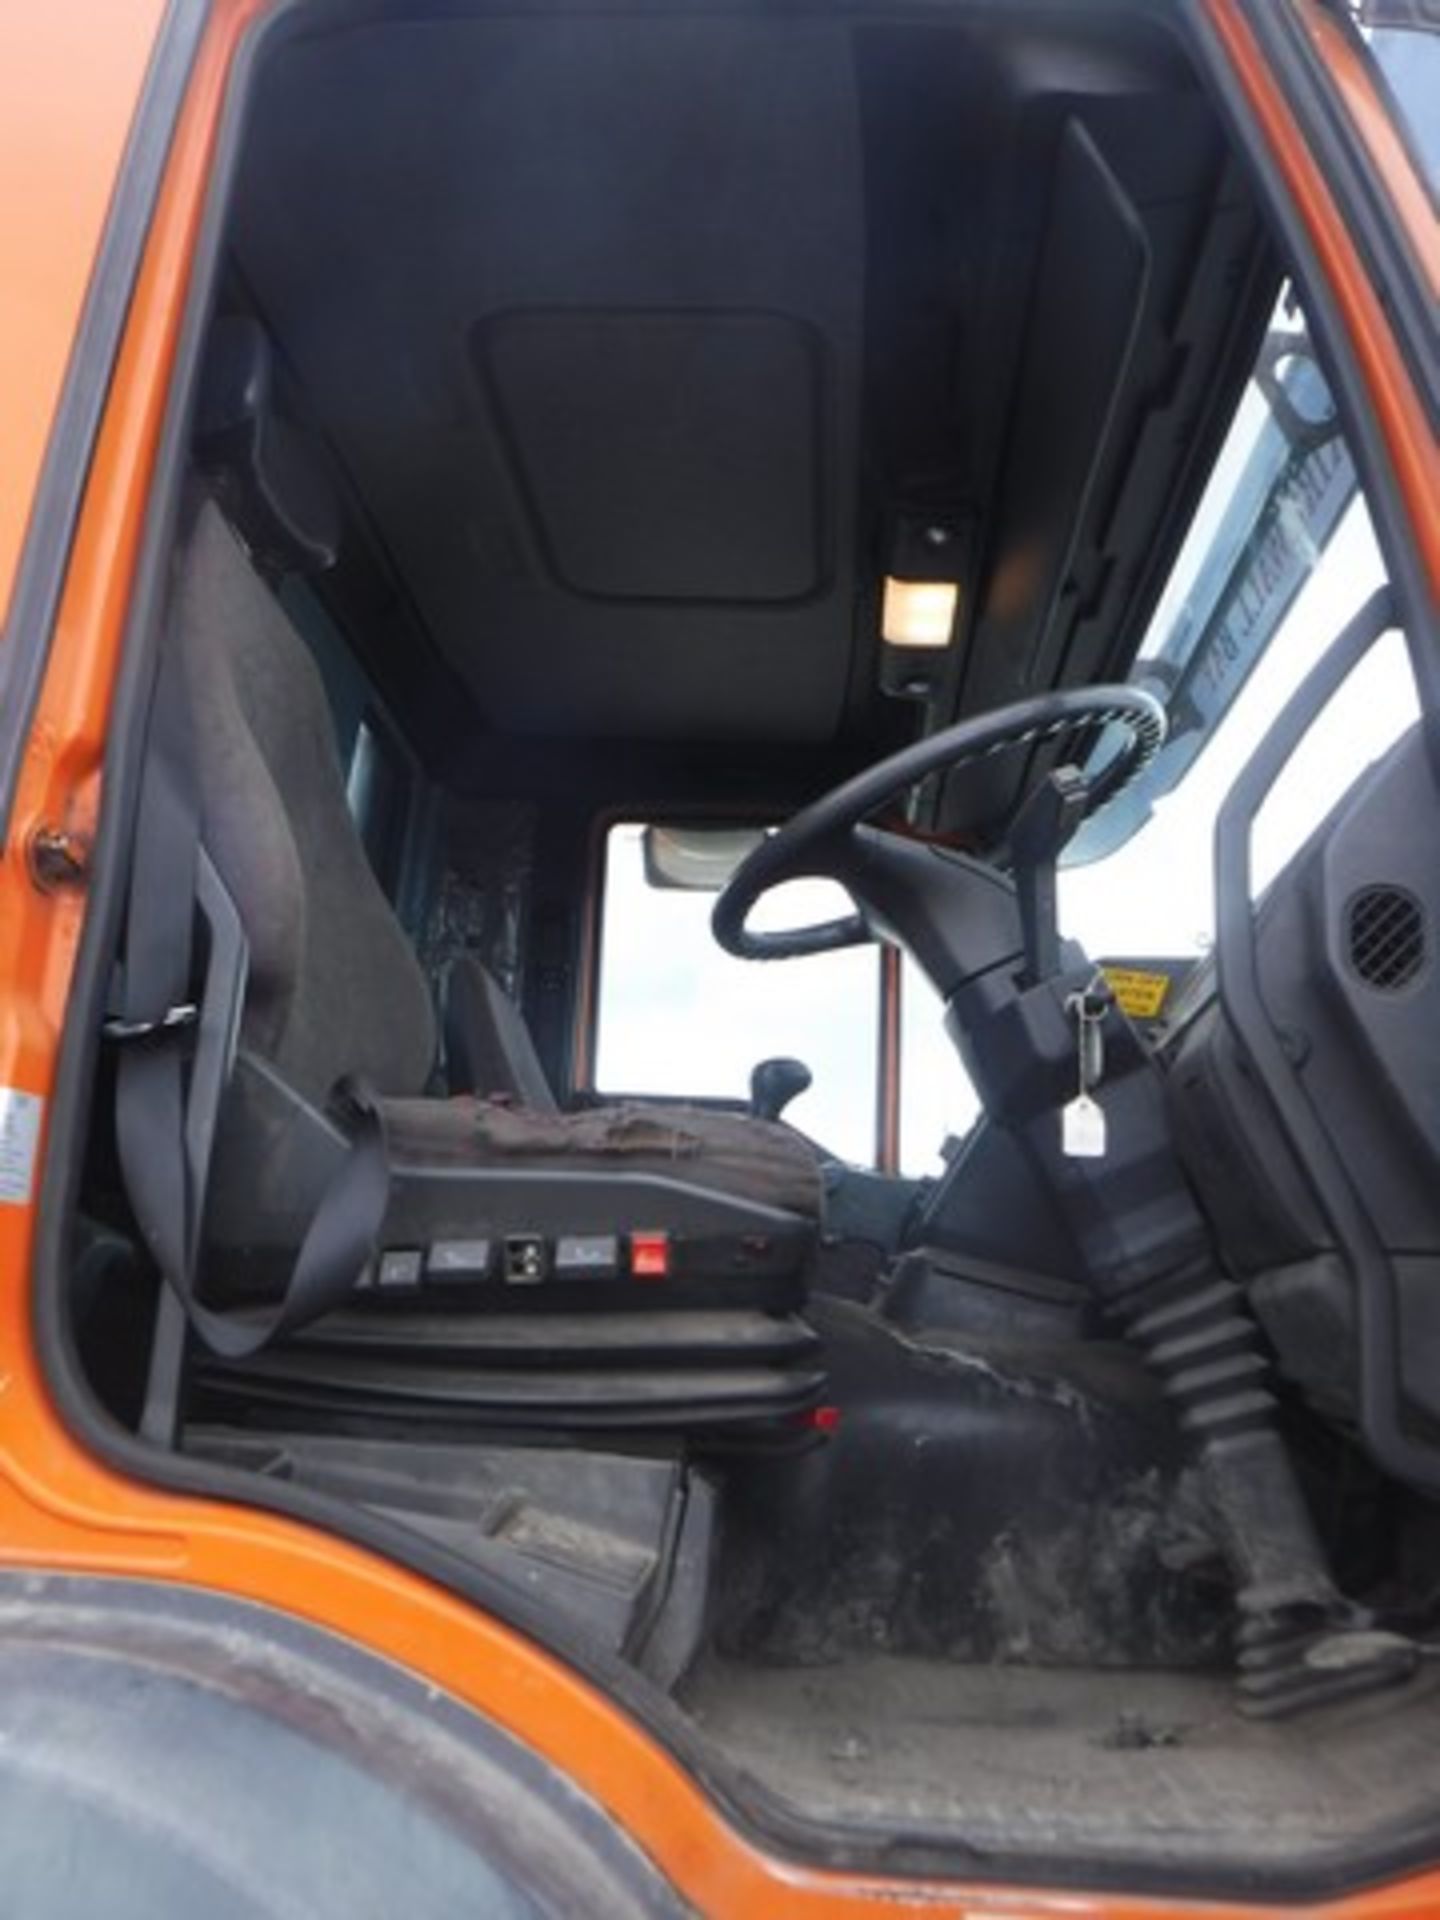 IVECO DAILY 50C15 3.5WB - 7790cc - Image 7 of 21